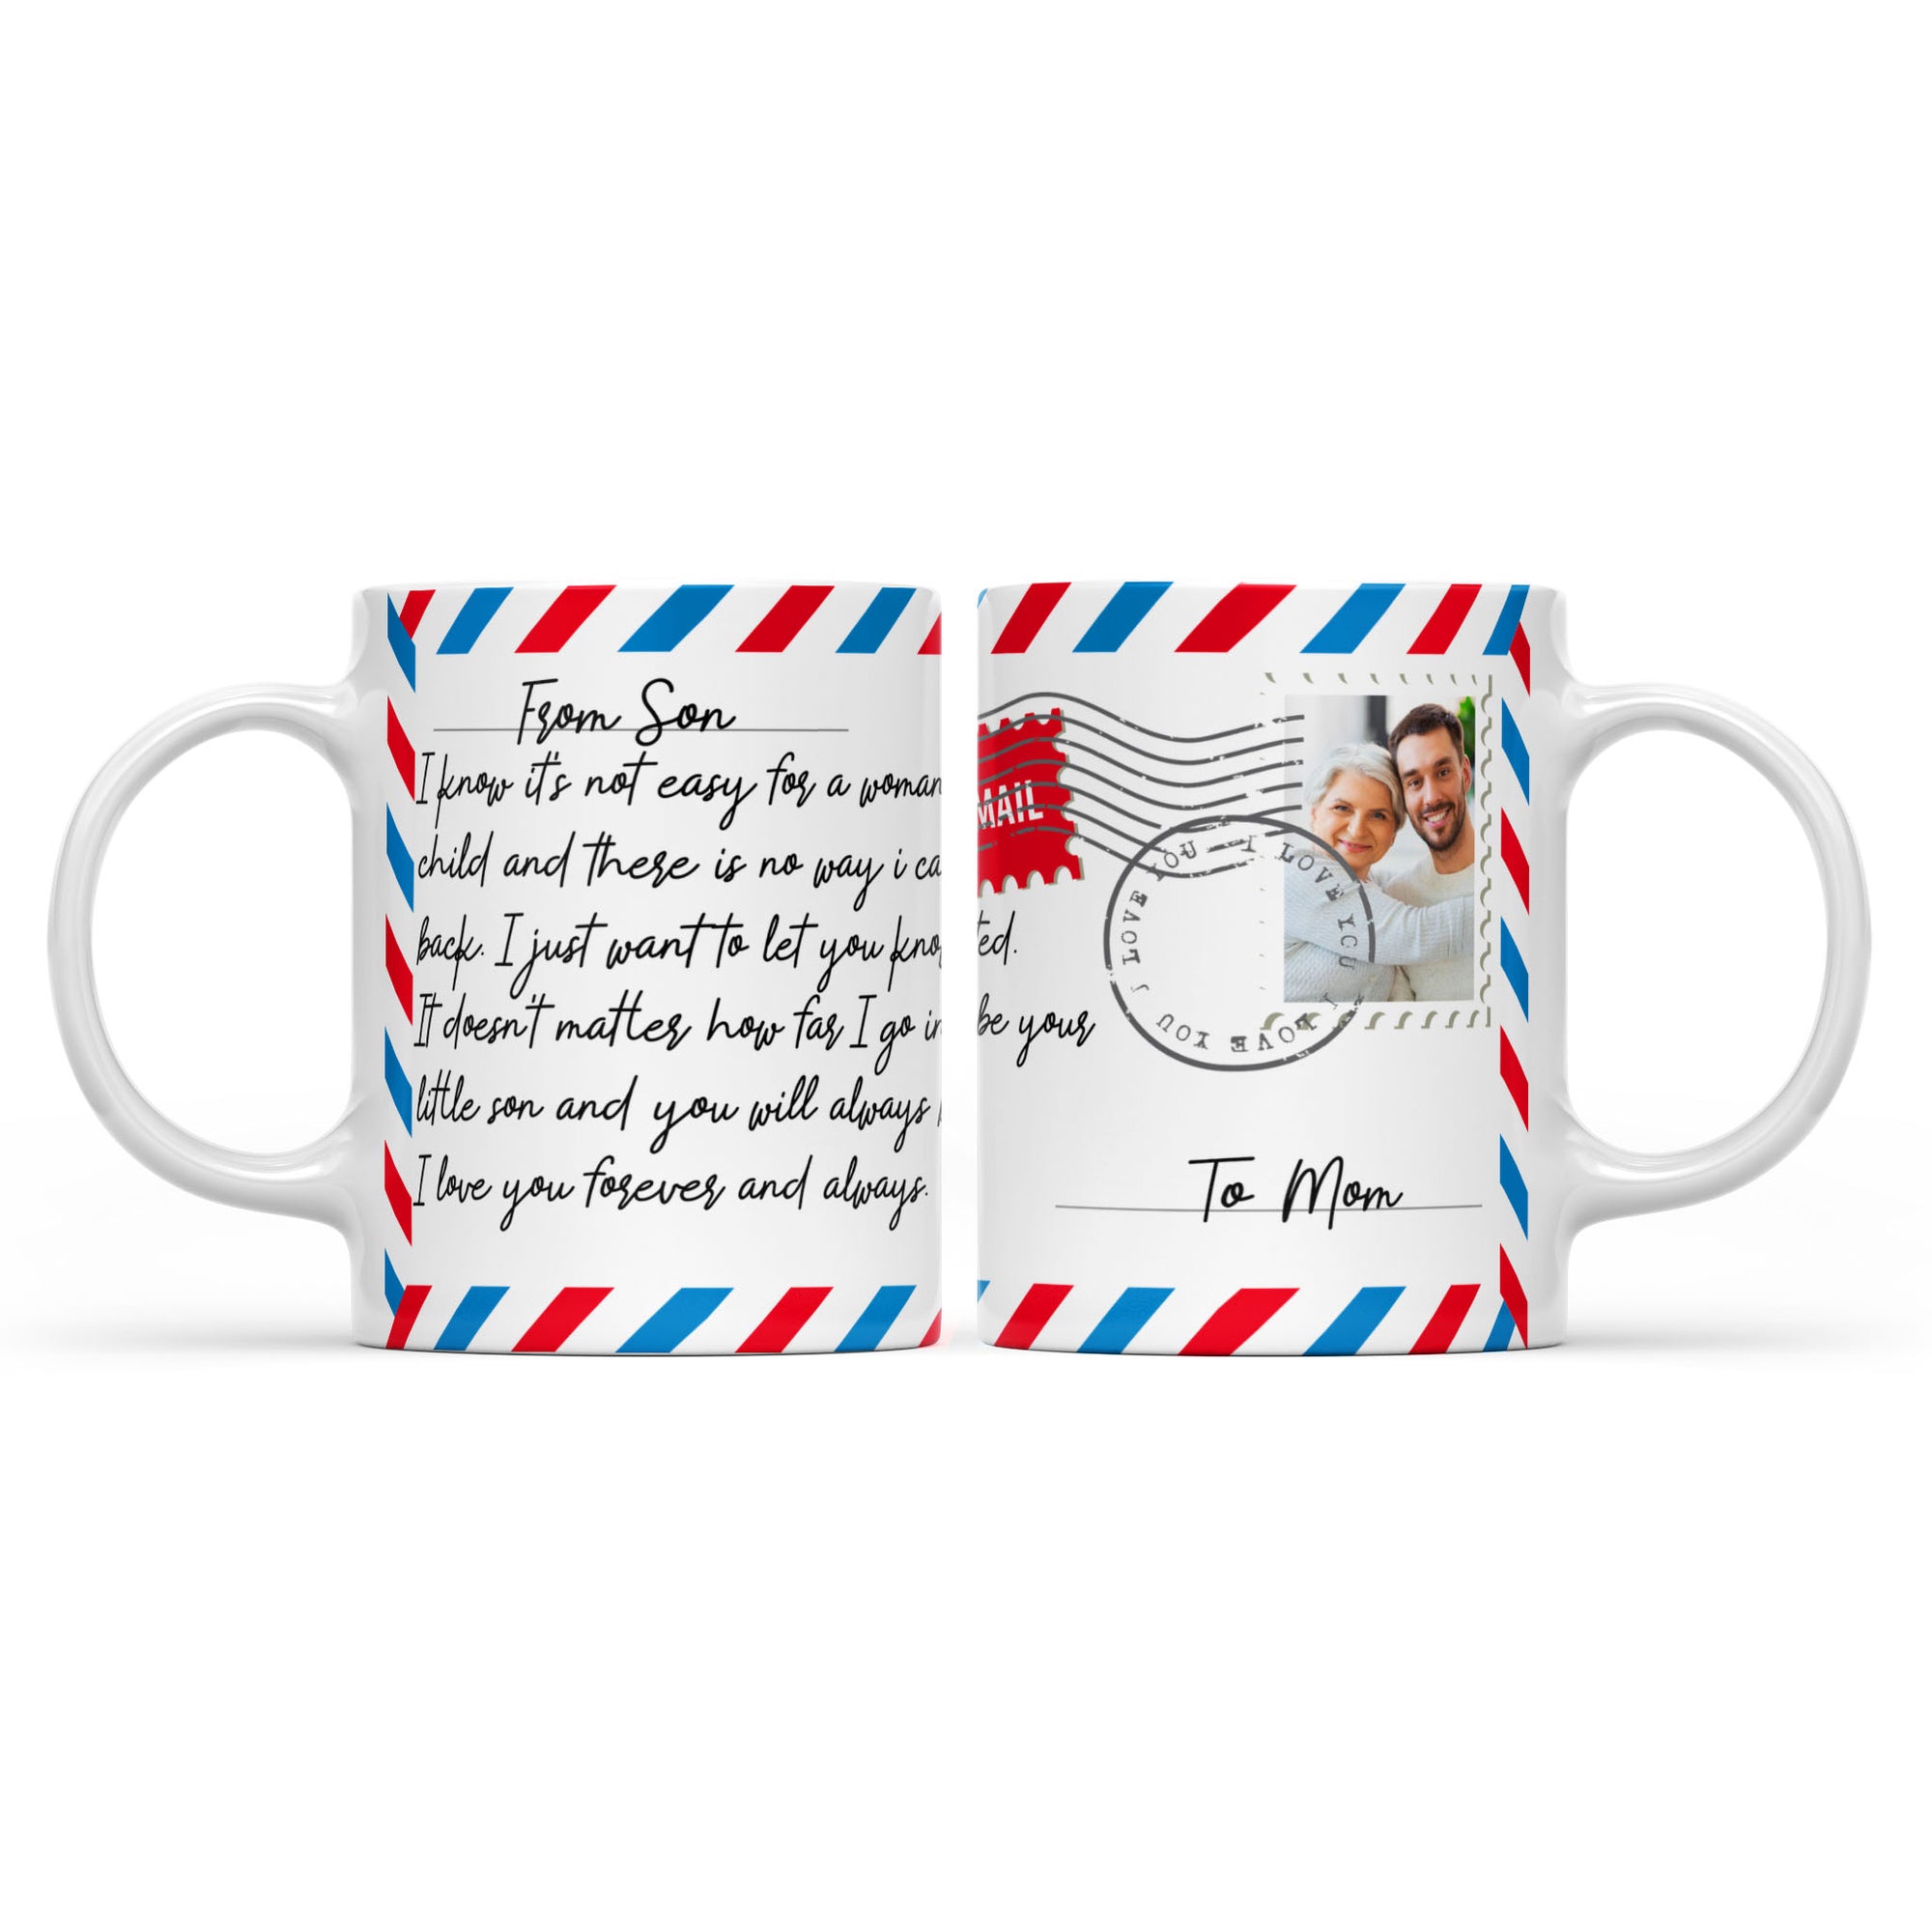 To My Son Coffee Mug From Mom and Dad, Gifts For Son Cup I Will Love You  Forever